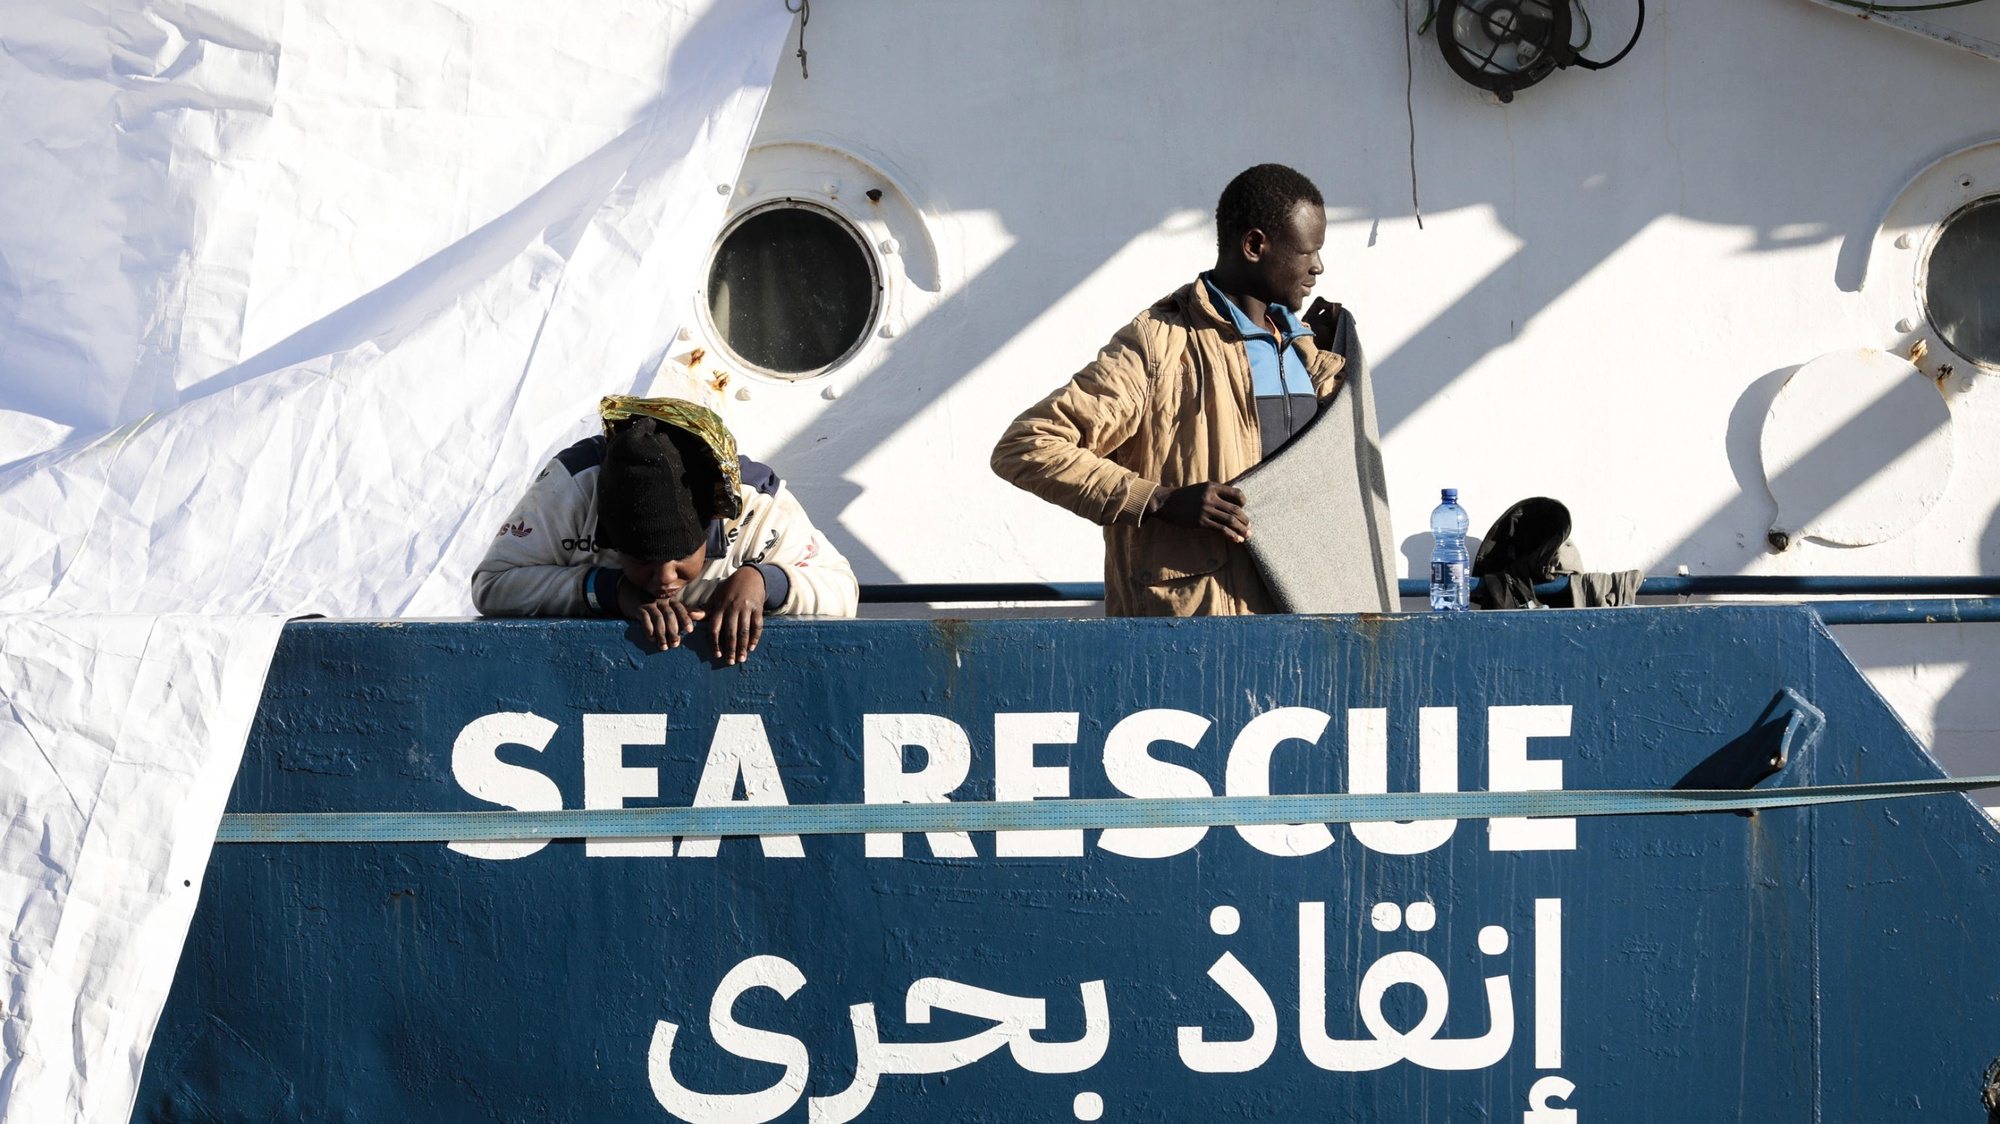 epa09662412 Some of the 440 migrants disembark from &#039;SeaWatch 3&#039; who entered port the previous day, in Pozzallo, Sicily, Italy, 01 January 2022. The German NGO migrant rescue ship Sea Watch 3 with 440 migrants on board arrived on 31 December 2021 in the port of Pozzallo. The ship was at sea since Christmas Eve after carrying out five rescue missions.  EPA/FRANCESCO RUTA